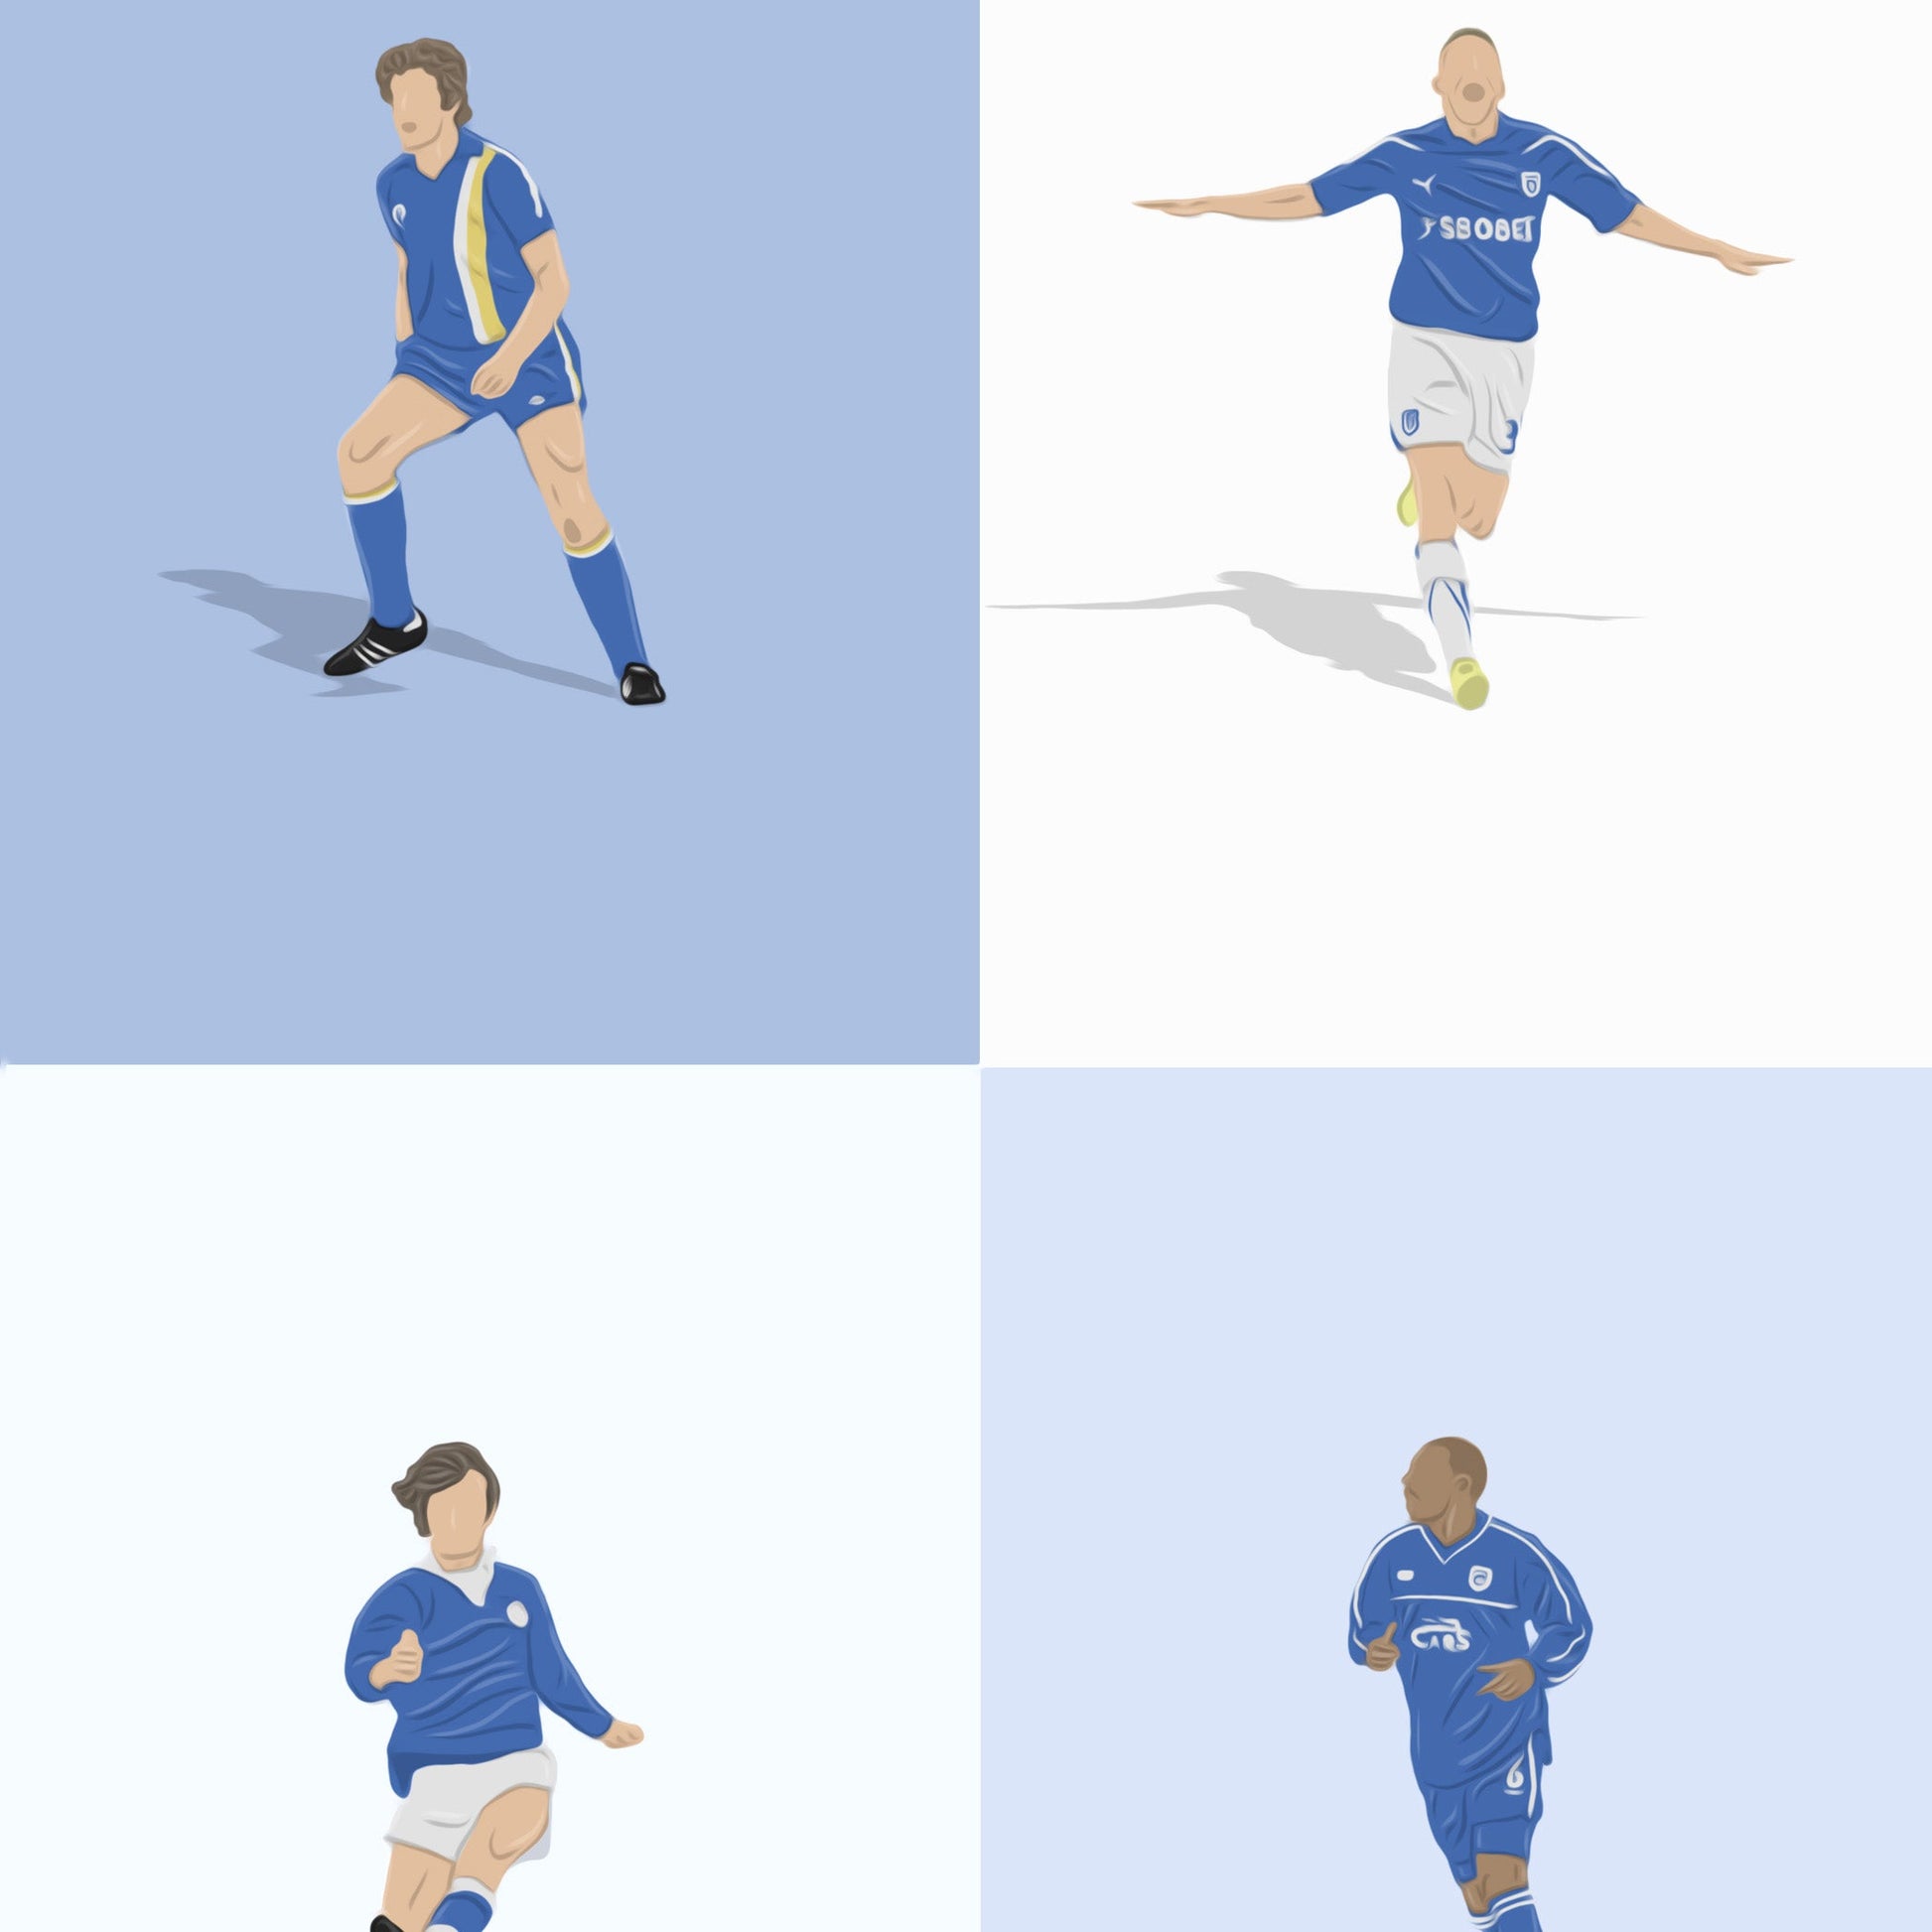 Cardiff City Legends Print - North Section